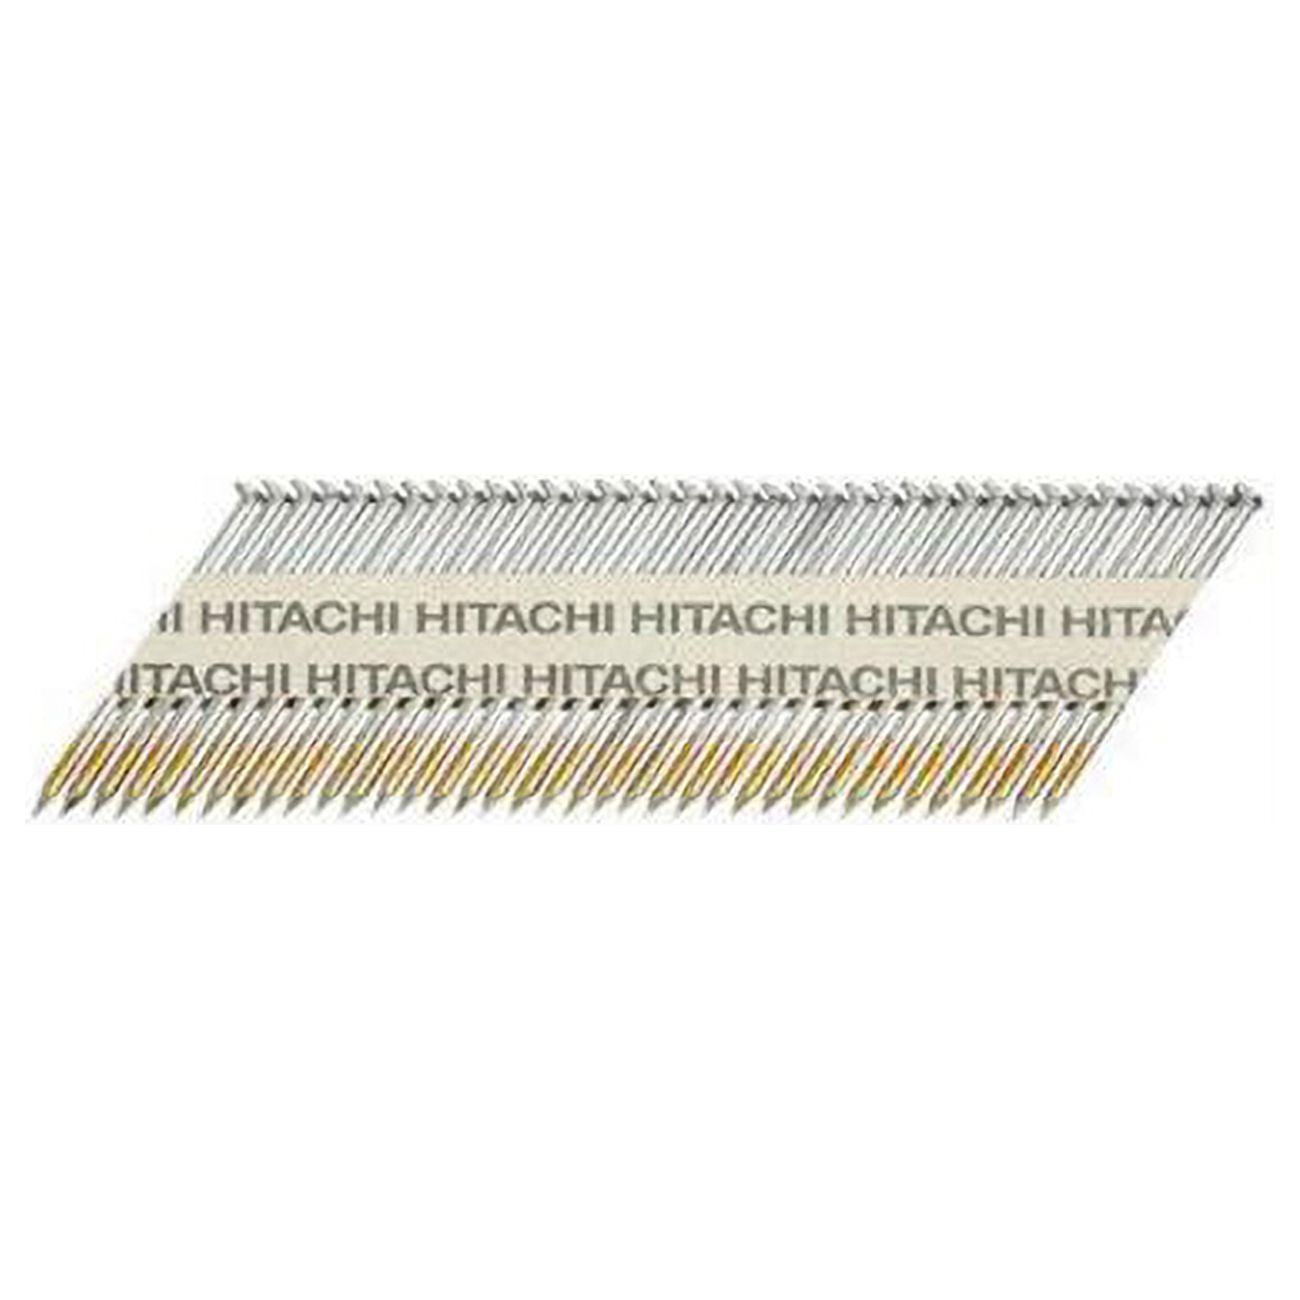 2597169 30 Deg 10 Gauge Smooth Shank Angled Strip Framing Nails, 3 X 0.12 In. Dia. - Pack Of 2500